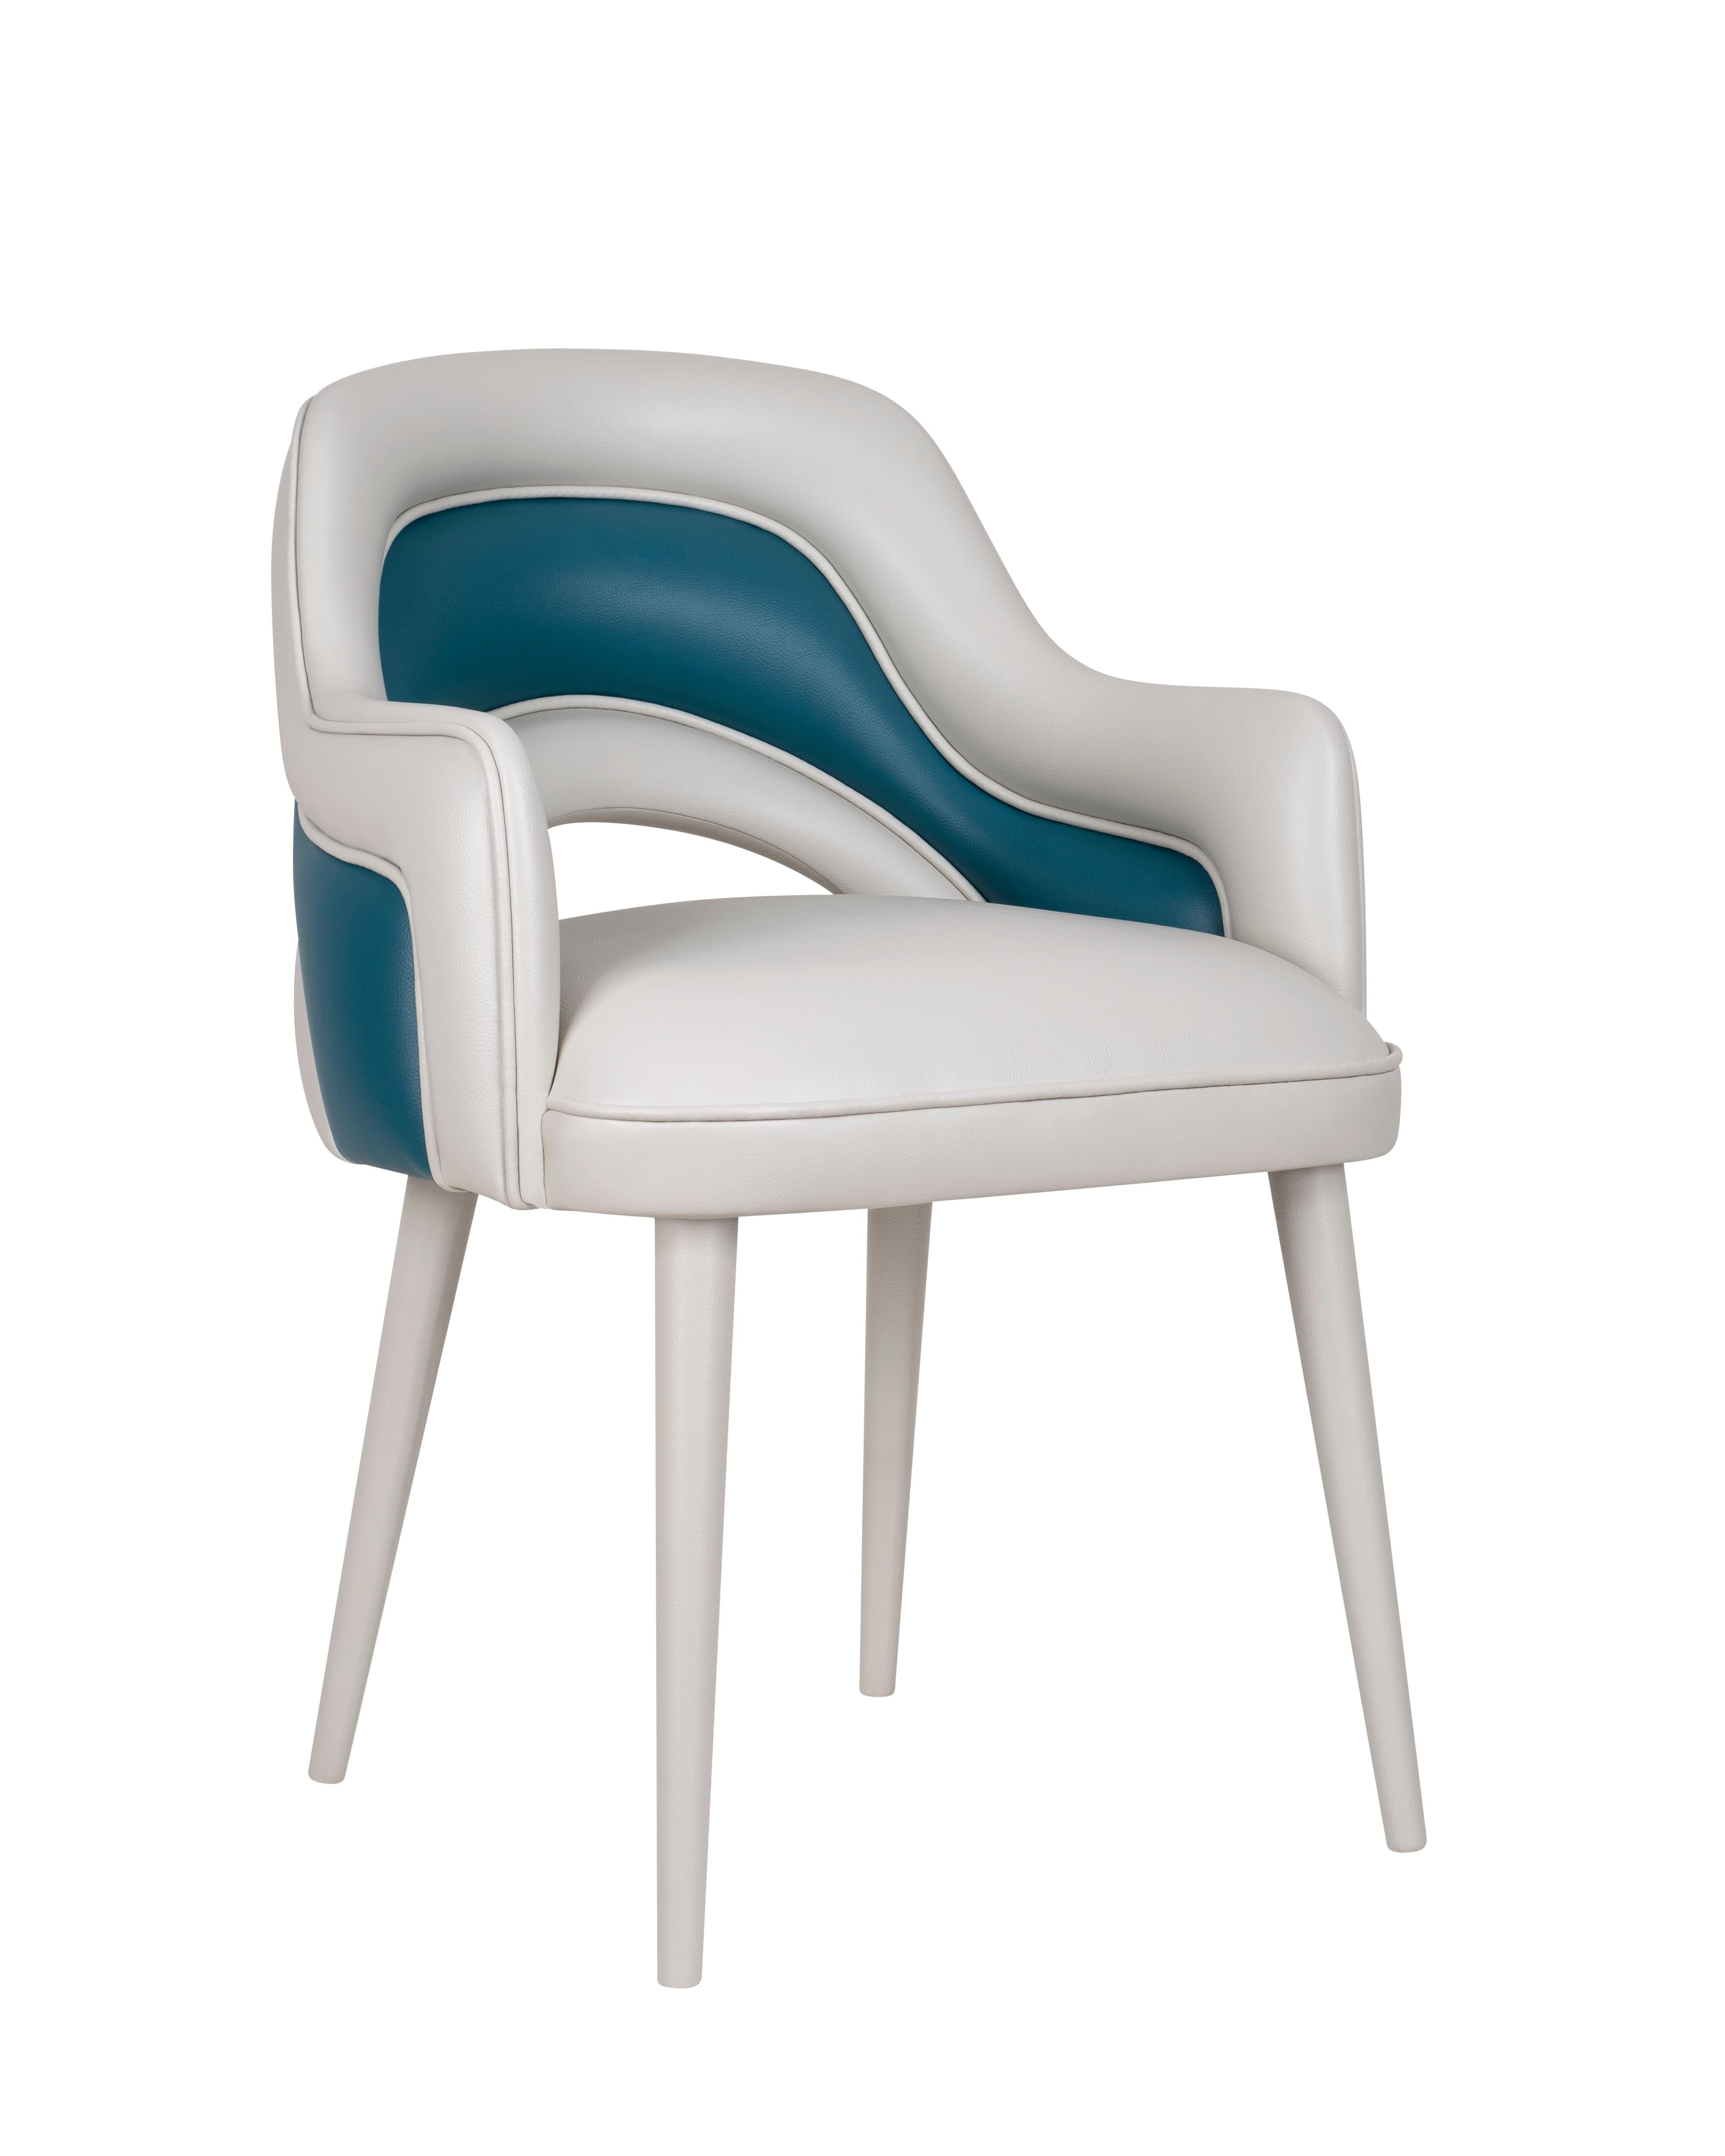 Cyd Charisse inspired Ottiu designers to conceived this soft yet imposing mid-century modern dining chair. Charisse wasn’t only an American actress, she was also an outstanding dancer with roles usually focused on her abilities as such. Because